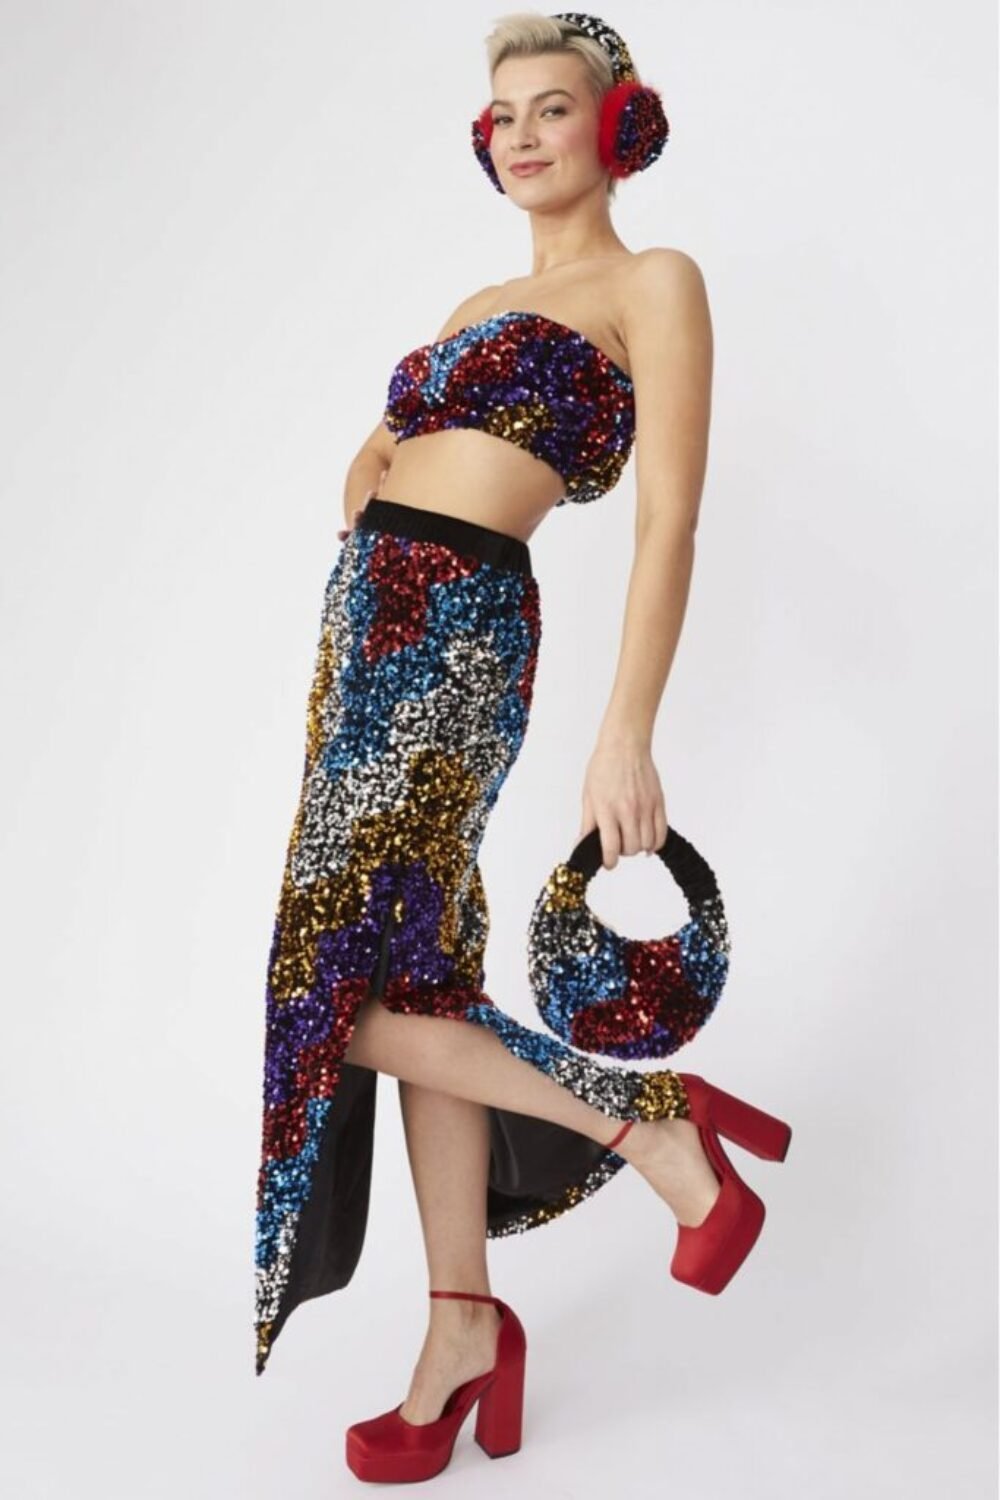 Shop Lux Multi Coloured Sequin Midi Skirt and women's luxury and designer clothes at www.lux-apparel.co.uk